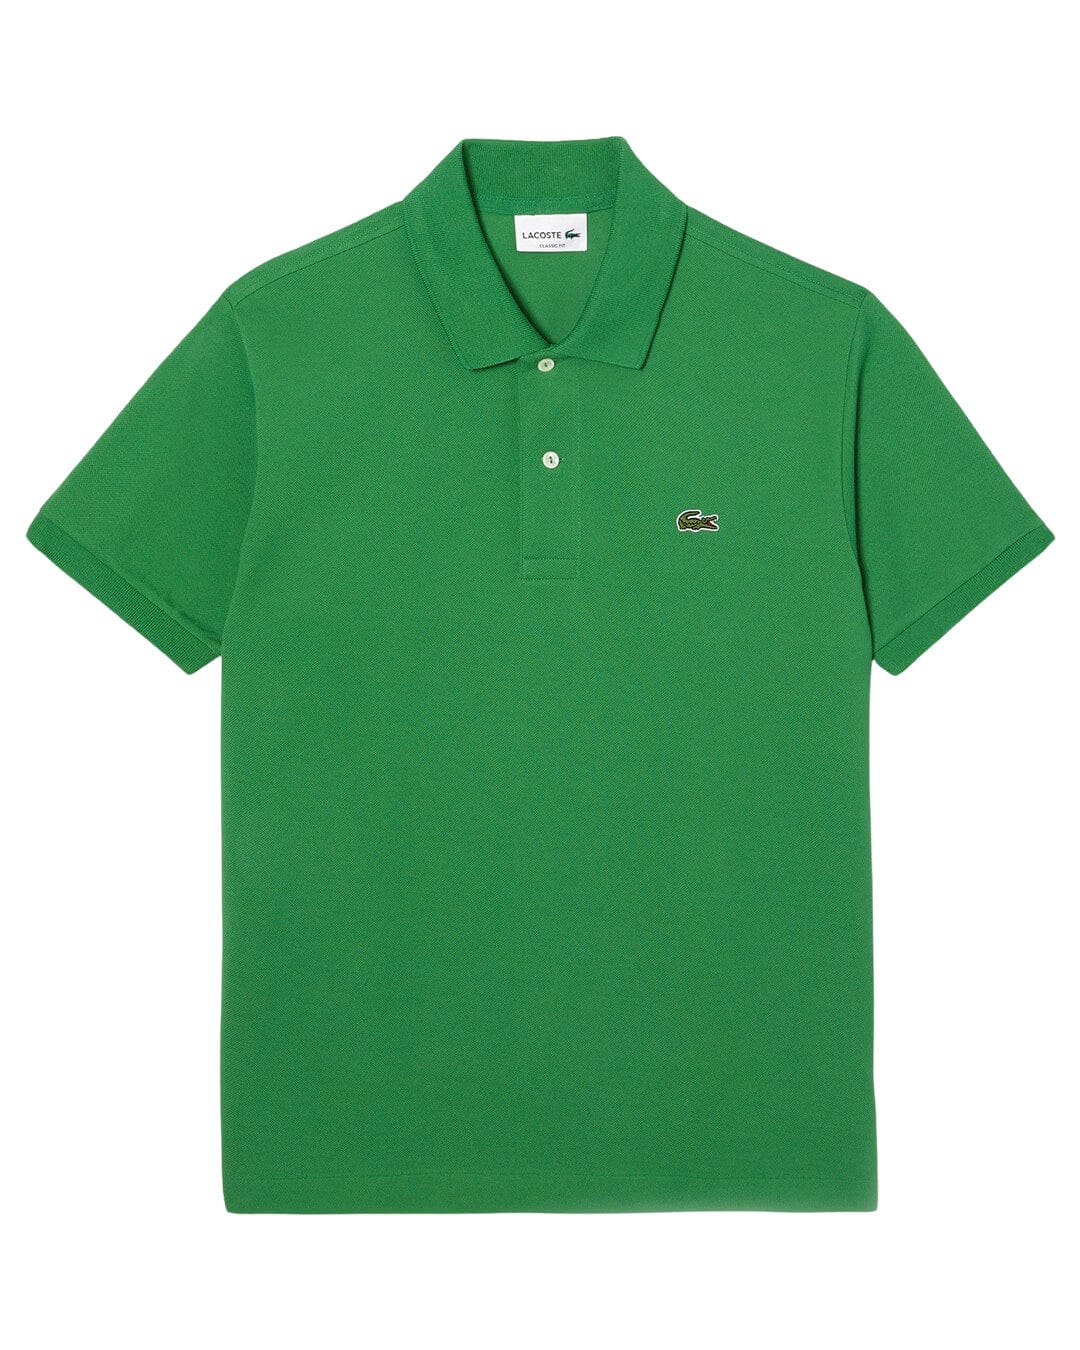 Lacoste Polo Shirts Lacoste Classic Fit L.12.12 Green Polo Shirt